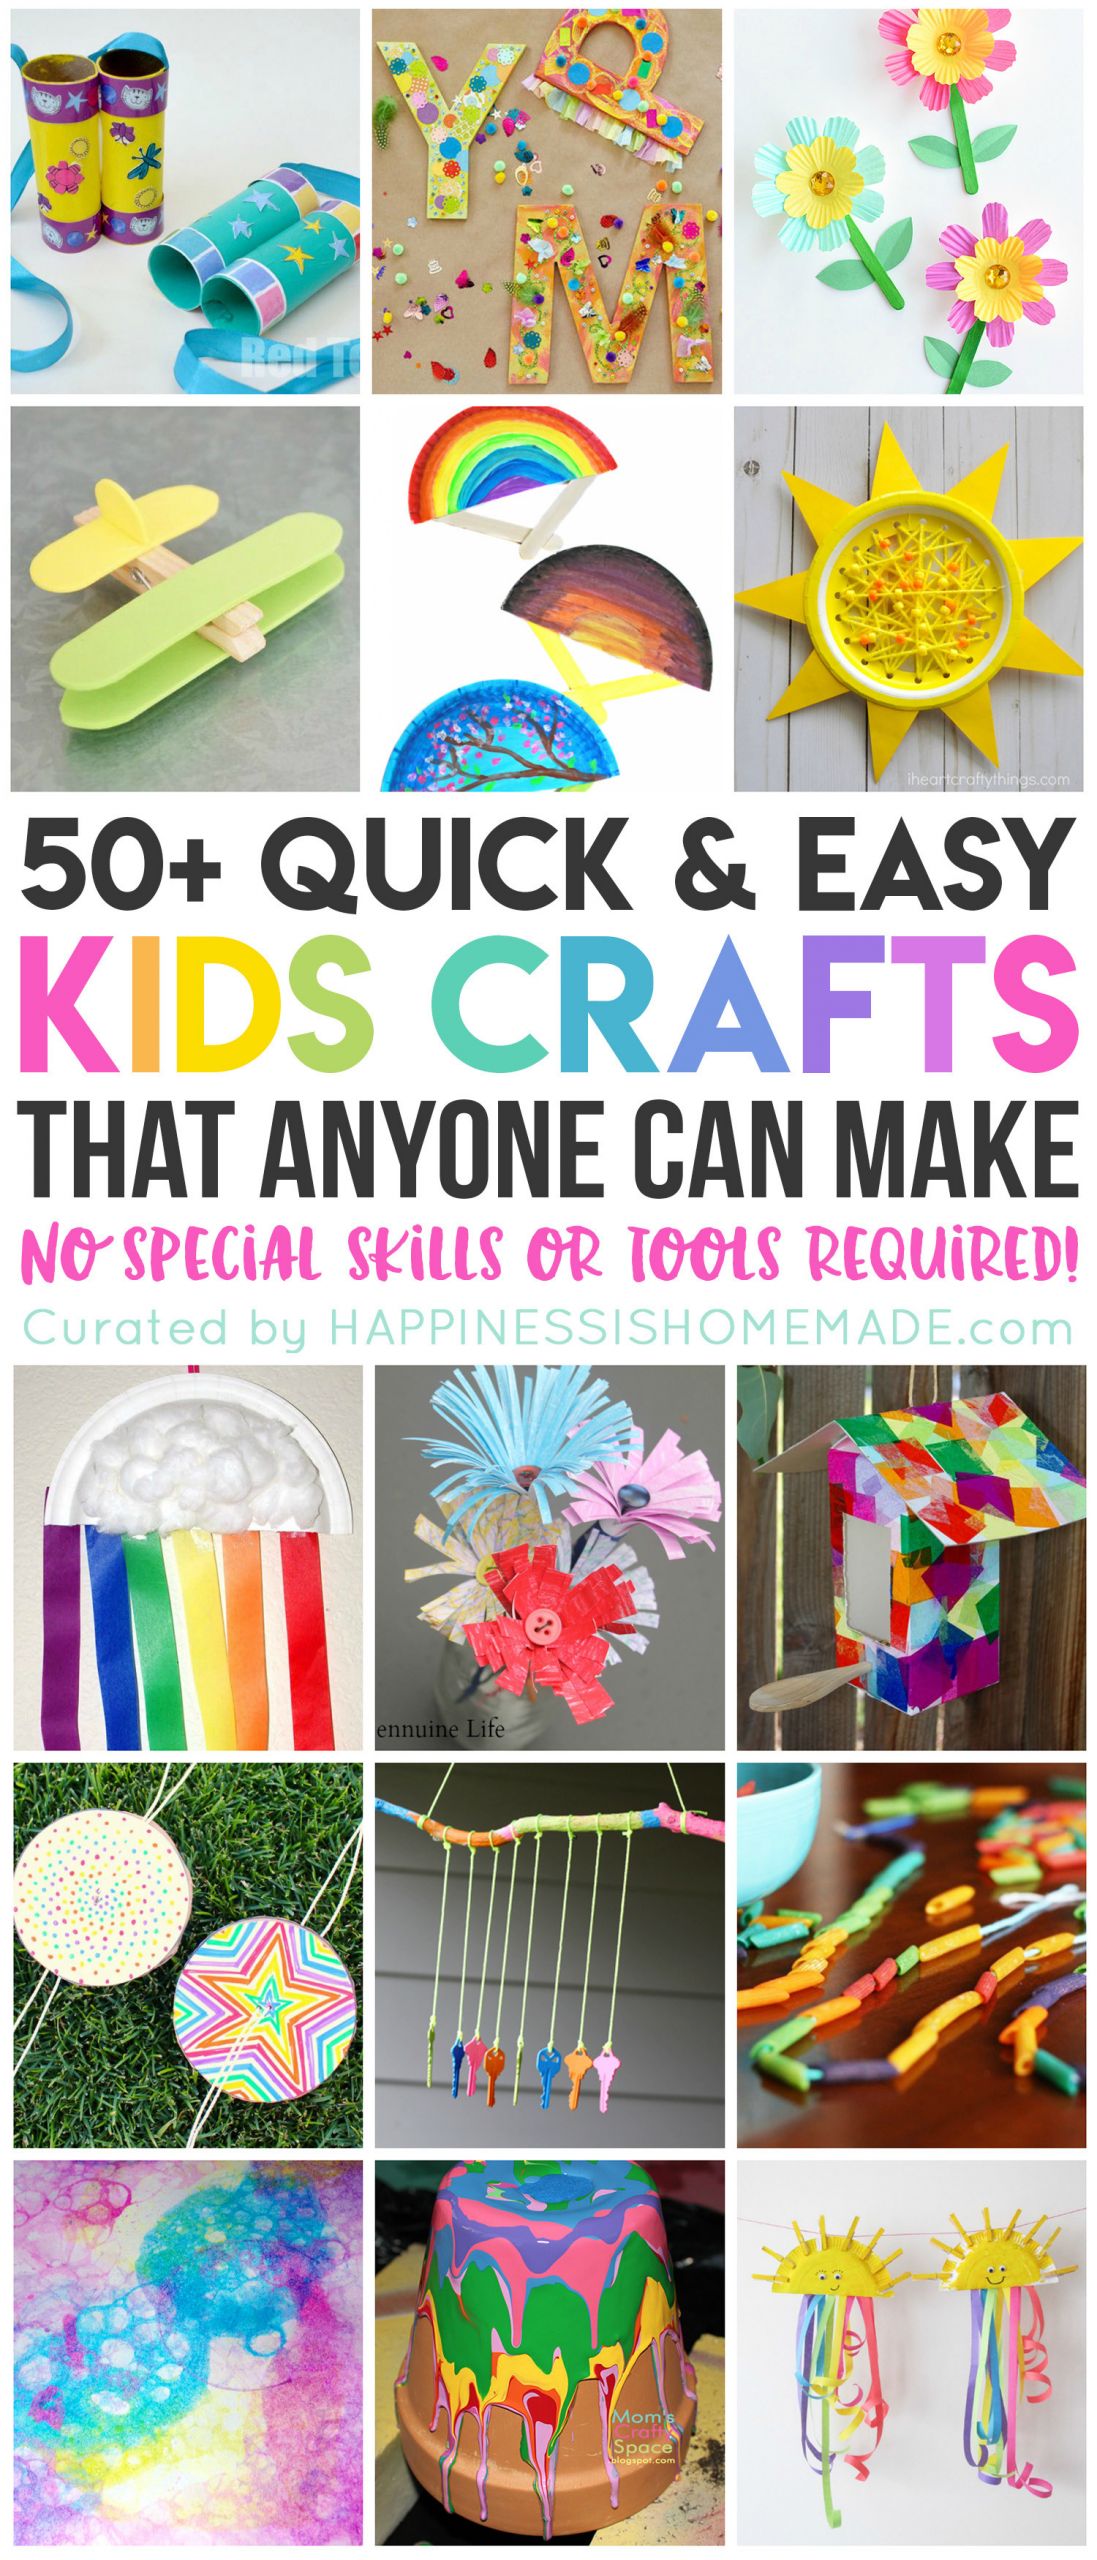 DIY Arts And Crafts For Kids
 50 Quick & Easy Kids Crafts that ANYONE Can Make